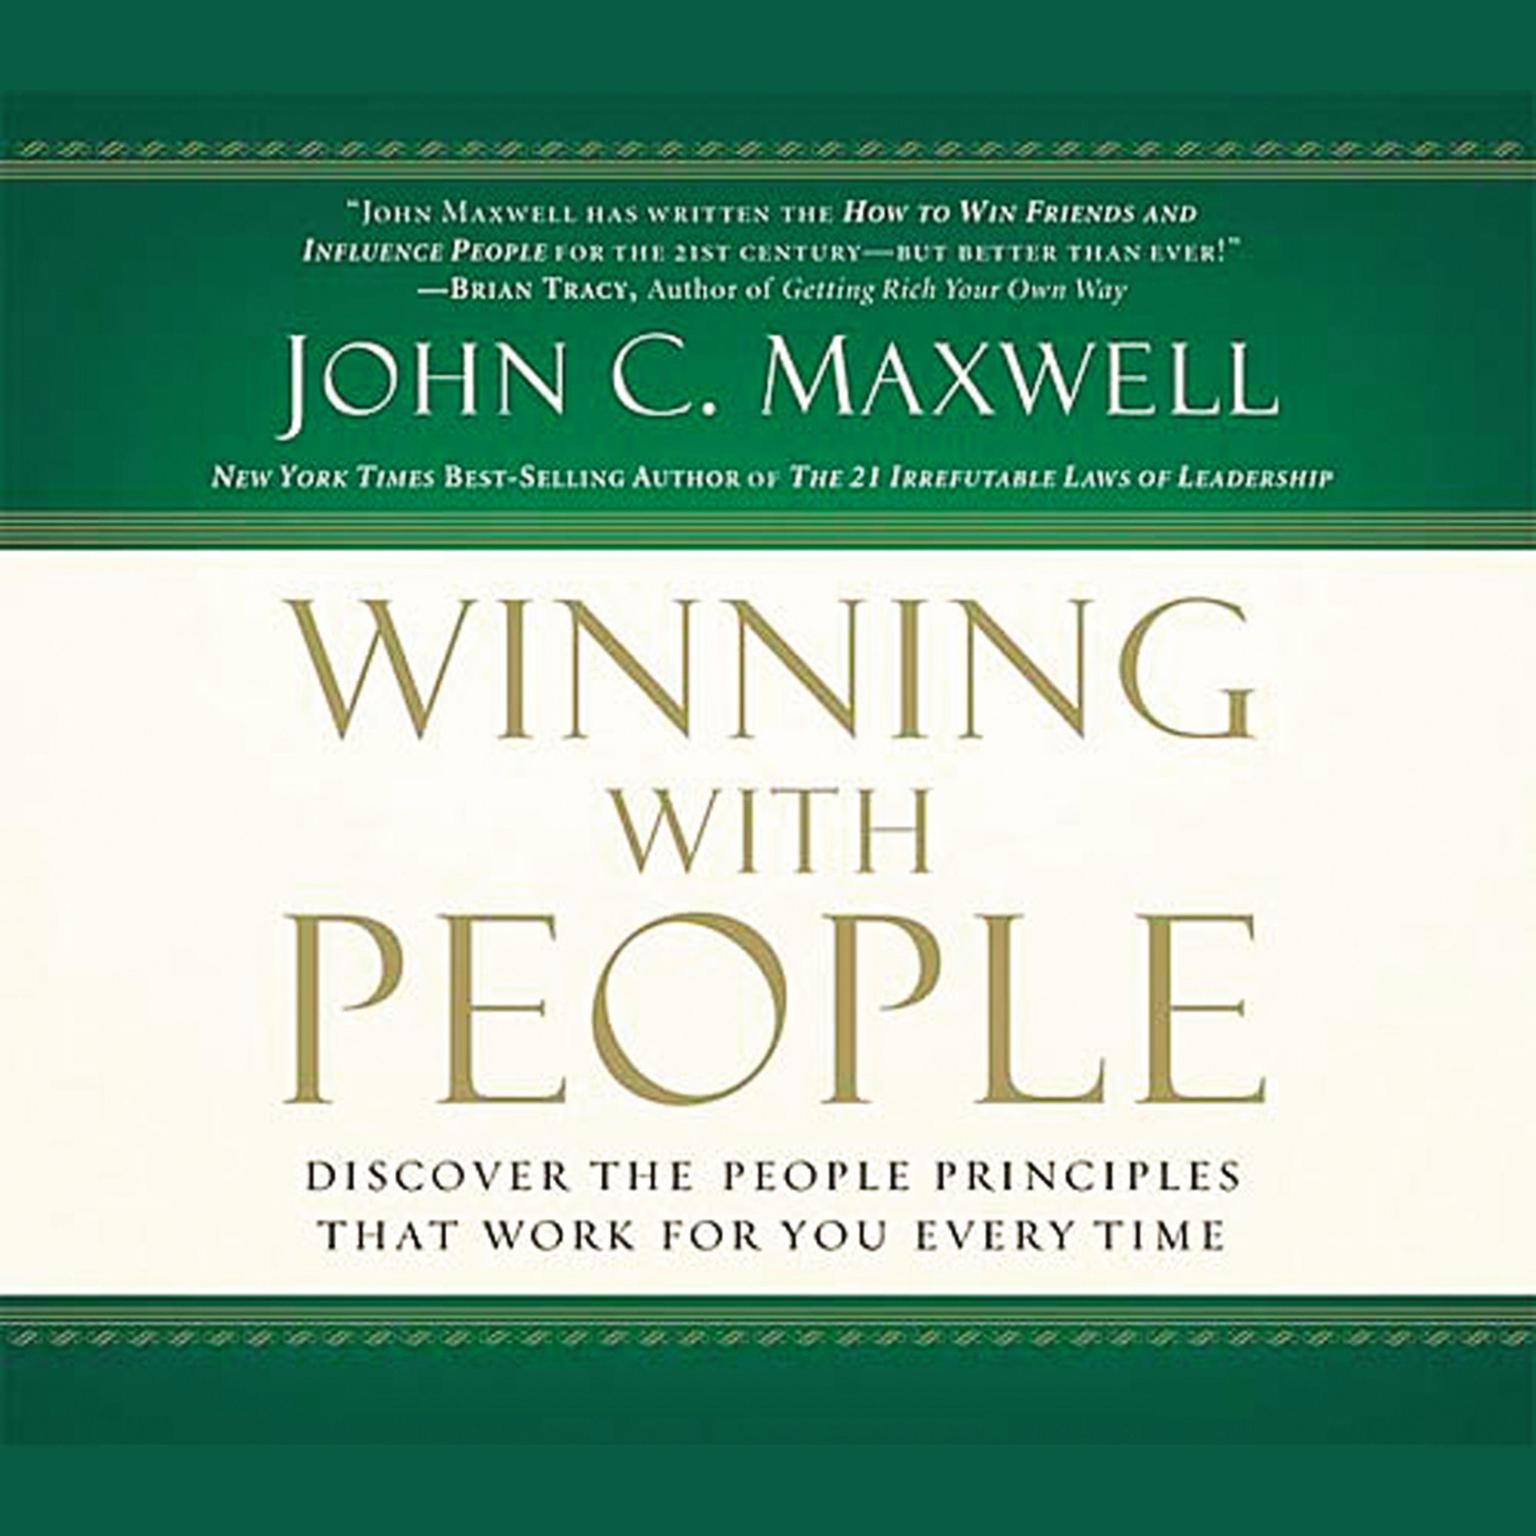 Winning With People (Abridged): Discover the People Principles that Work for You Every Time Audiobook, by John C. Maxwell